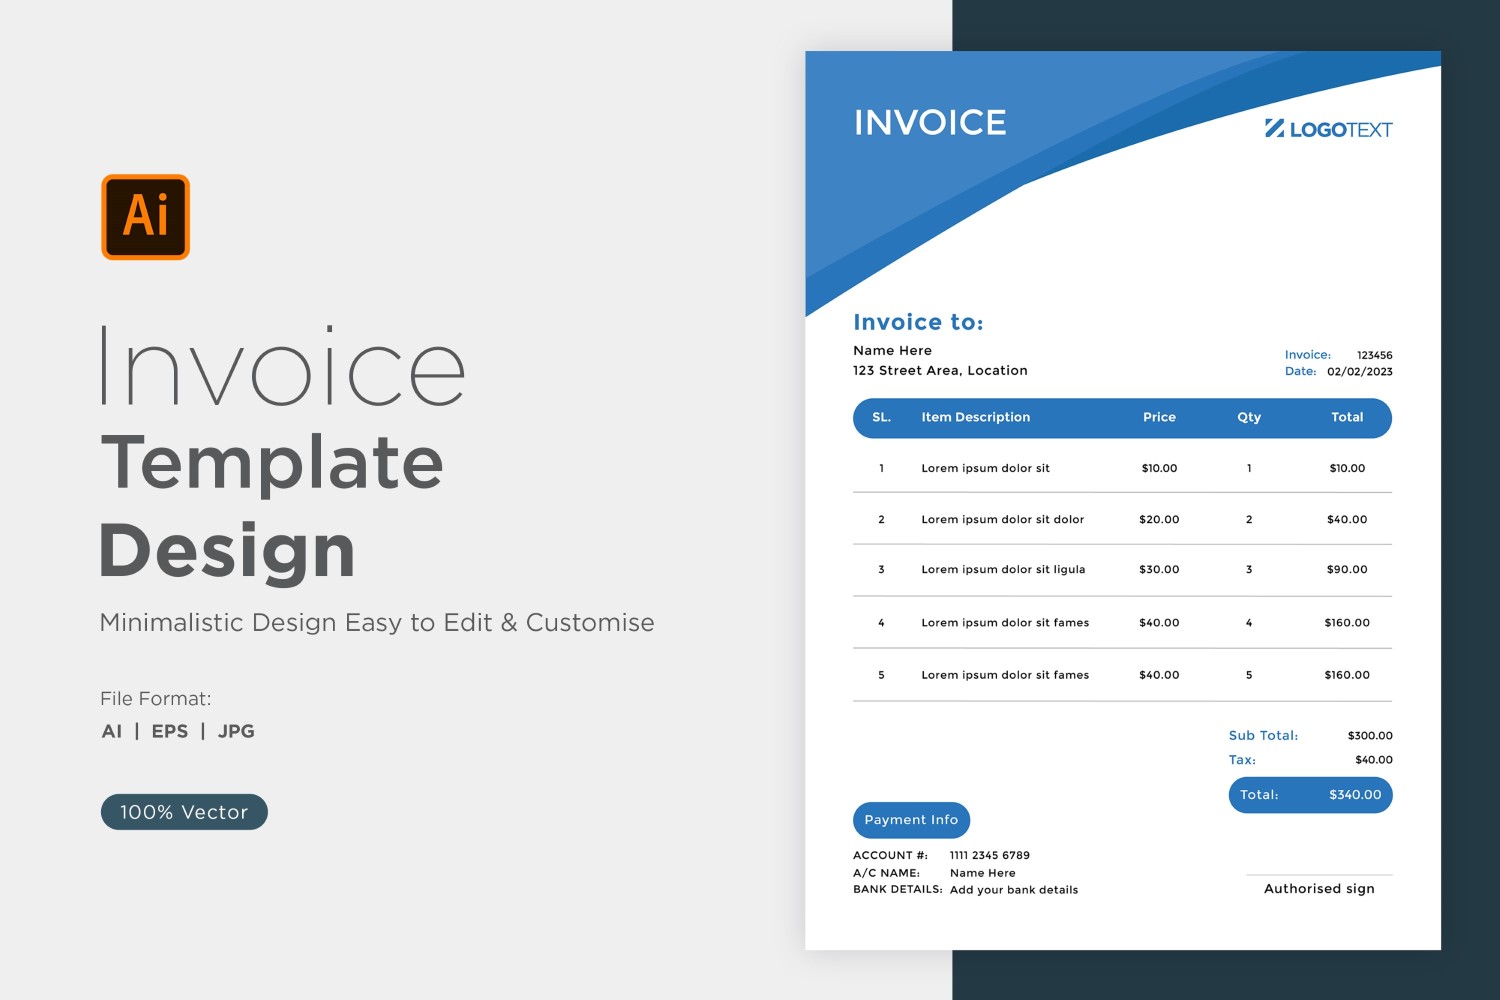 Corporate Invoice Design Template Bill form Business Payments Details Design Template 99